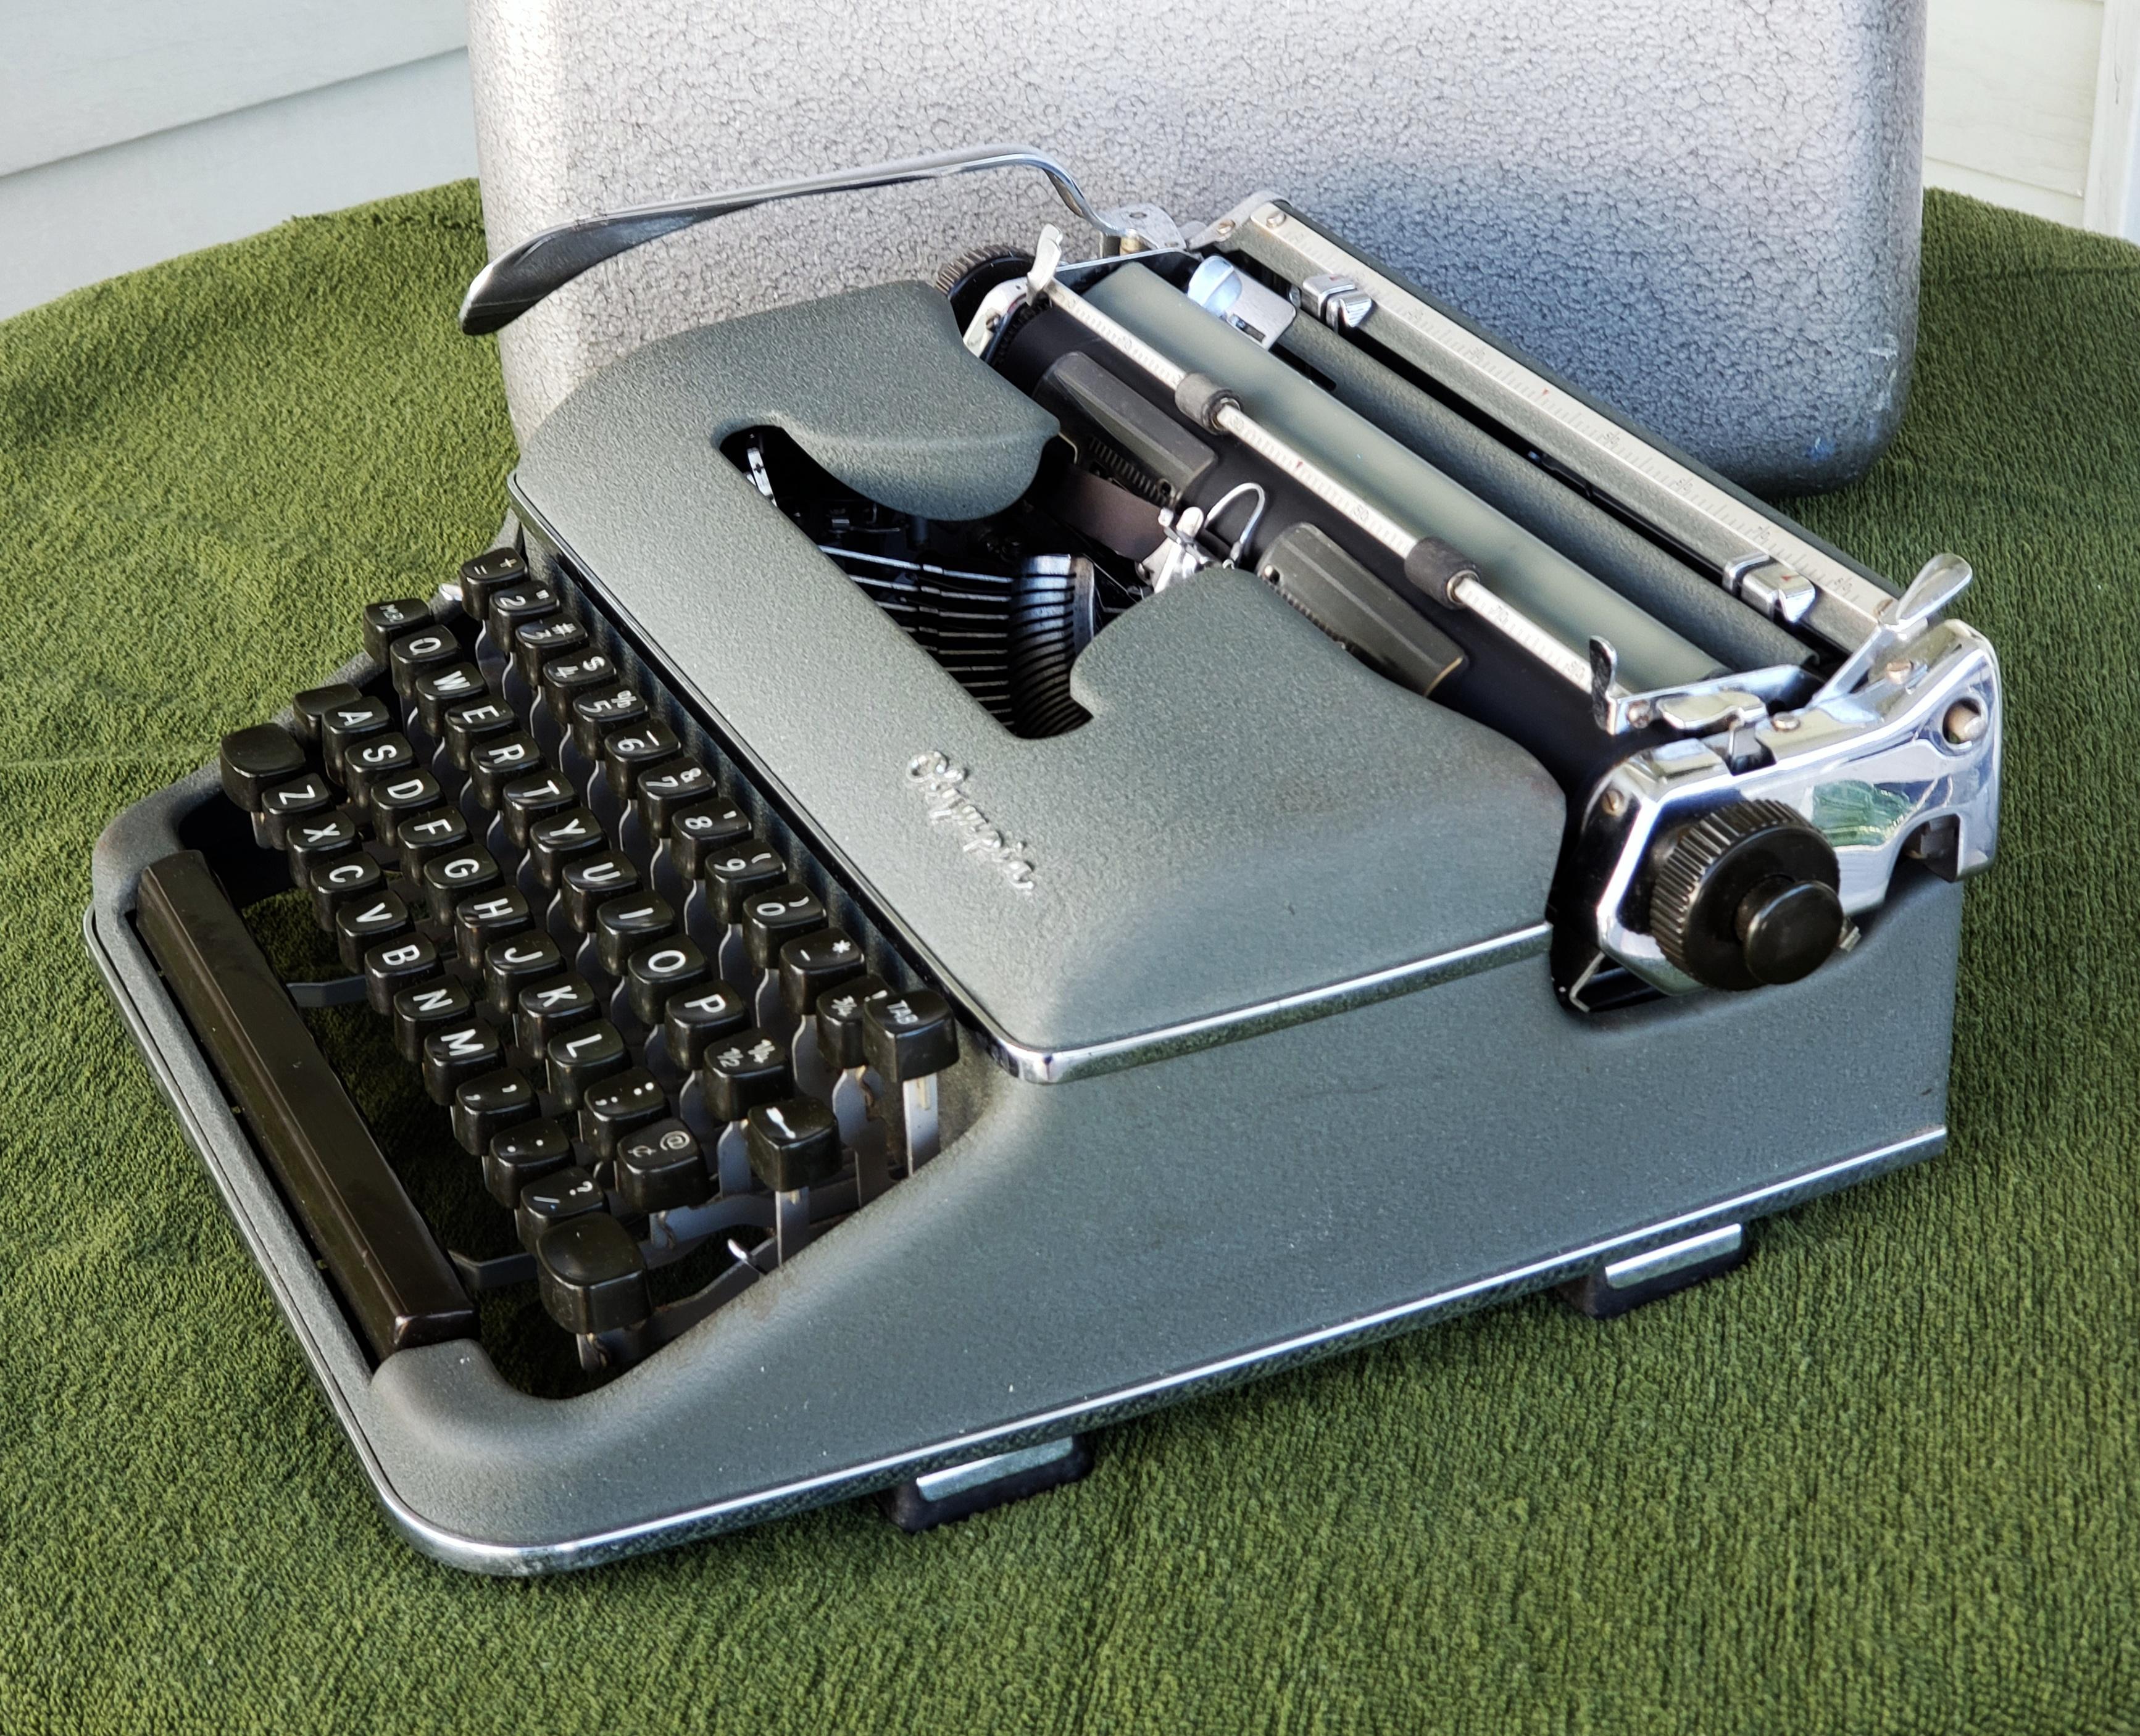 Metal 1950s Olympia SM3 De Luxe Typewriter with Hard Case